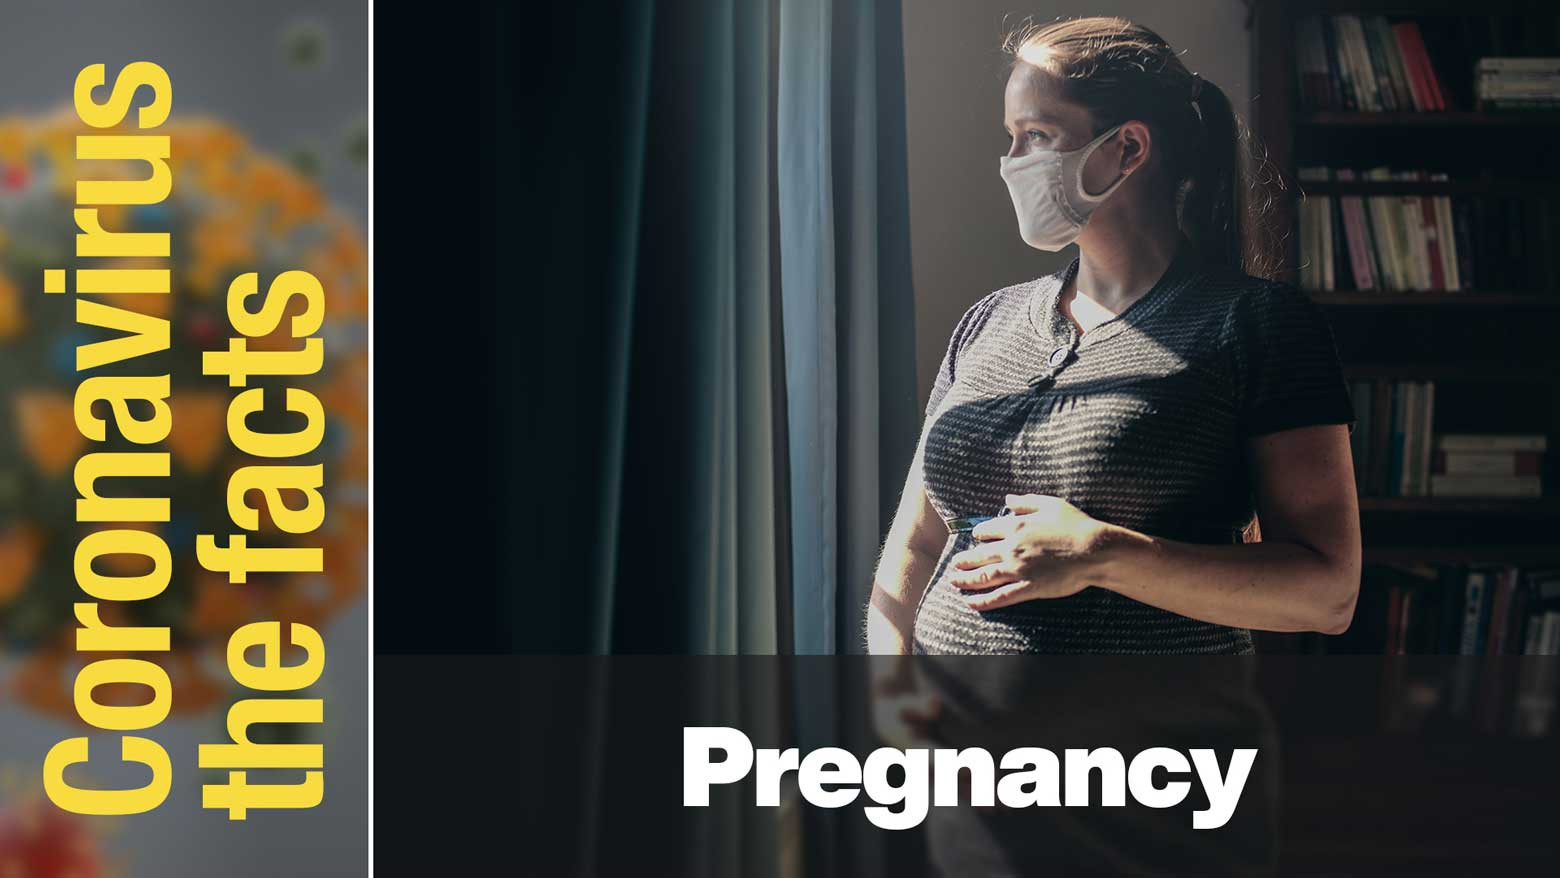 What are the risks for pregnant women?